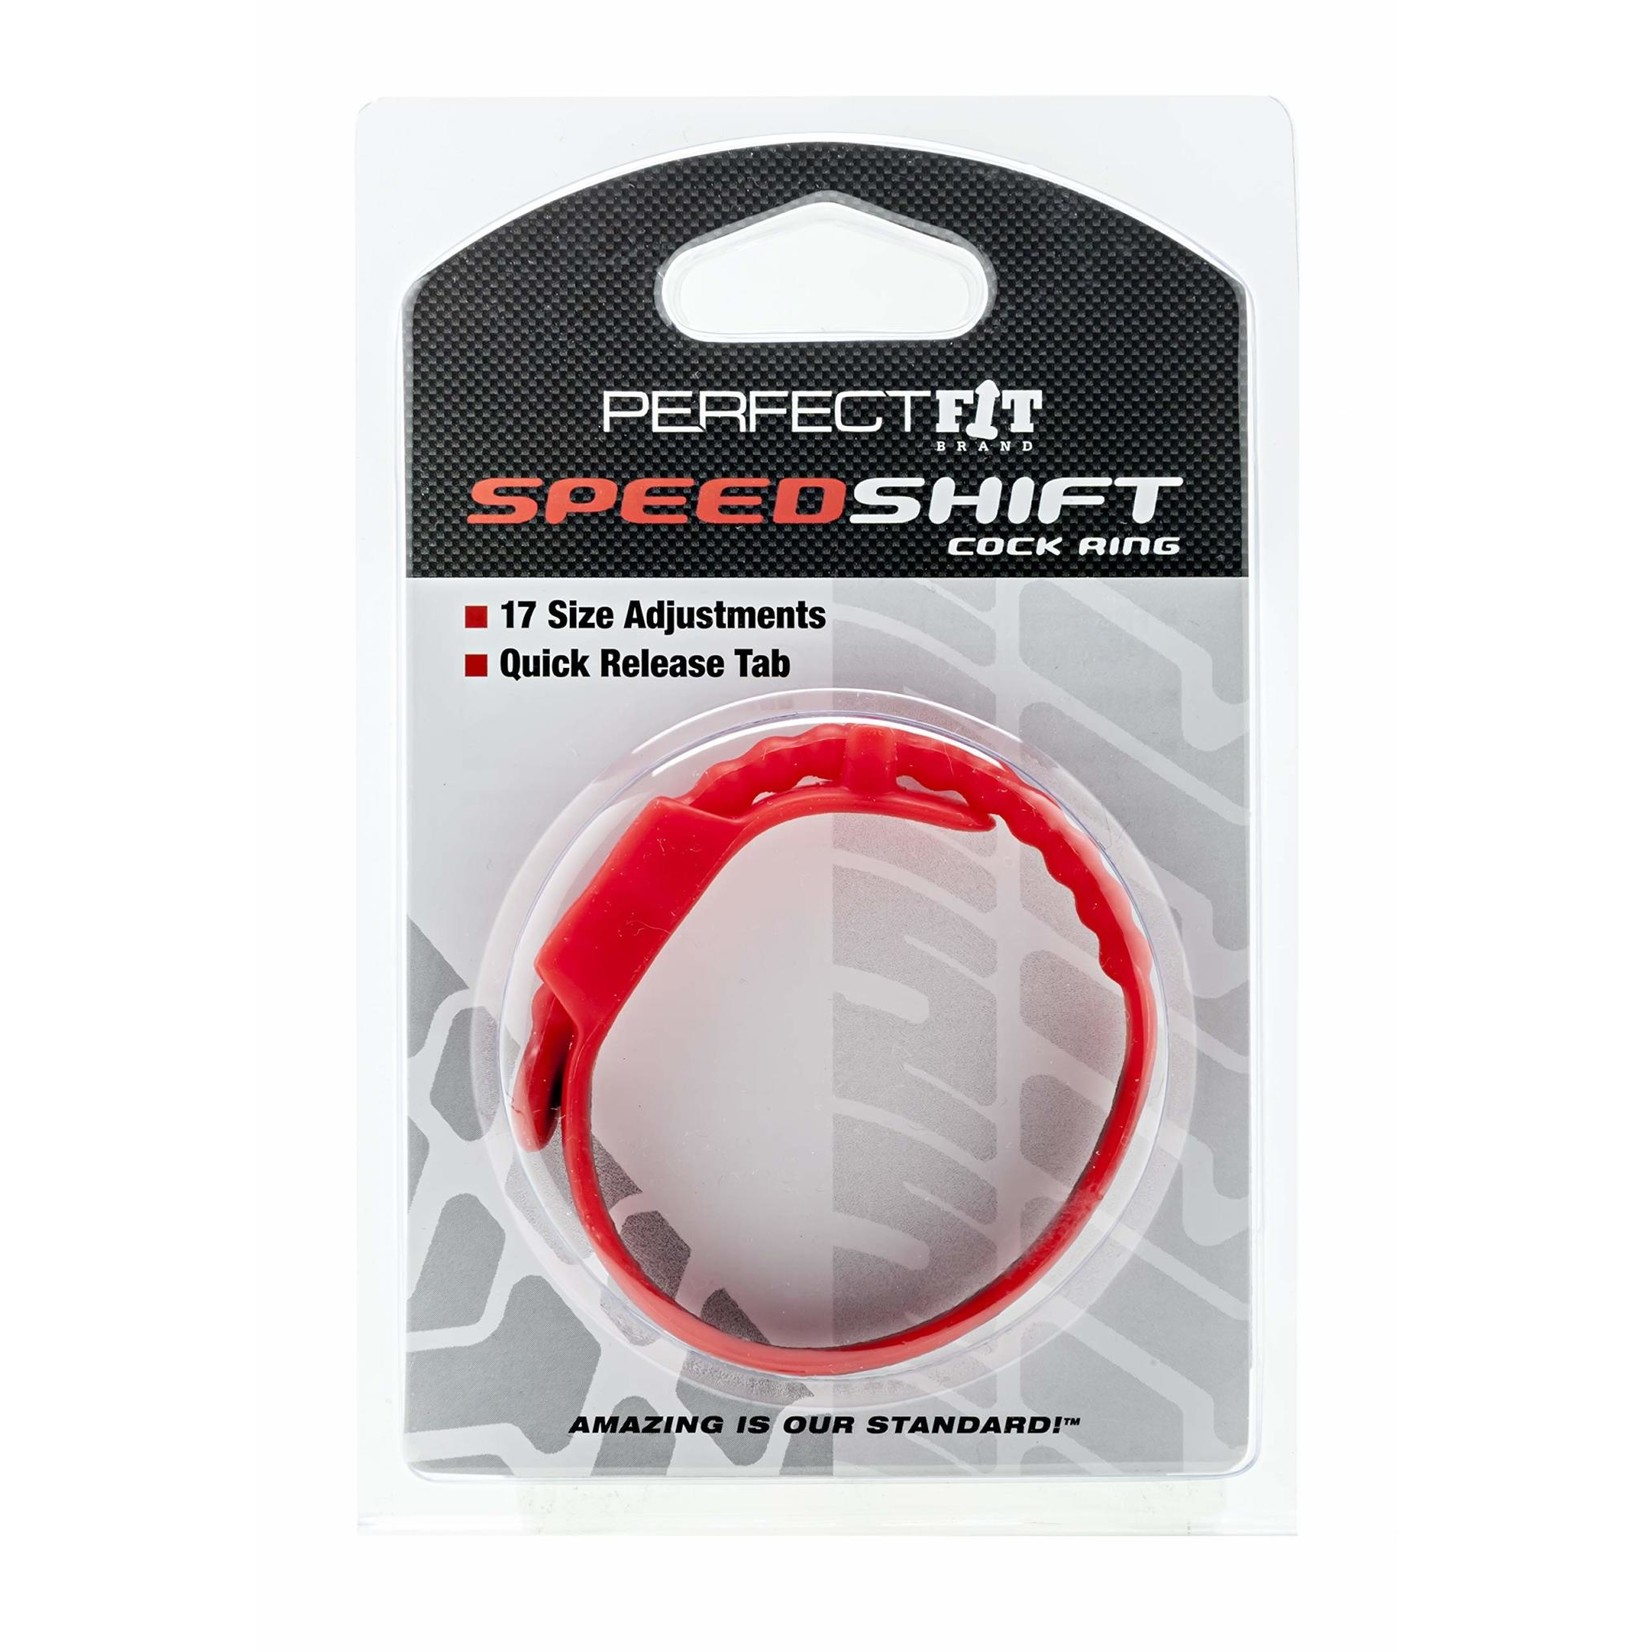 Perfetti Van Melle Perfect Fit Speed Shift Cock Ring- Red